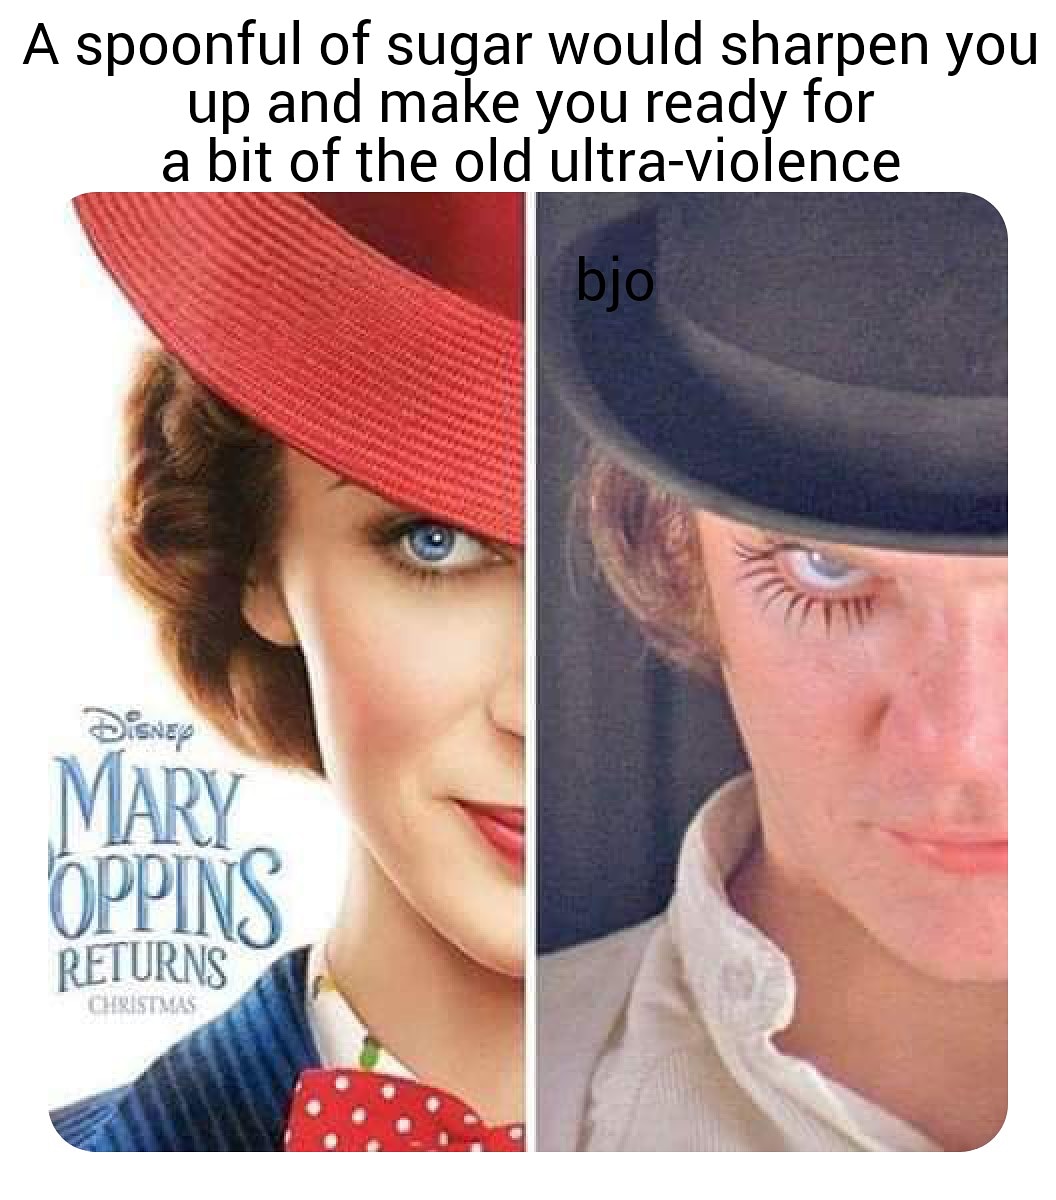 mary poppins returns clockwork orange - A spoonful of sugar would sharpen you up and make you ready for a bit of the old ultraviolence bjo Mary Oppins Returns